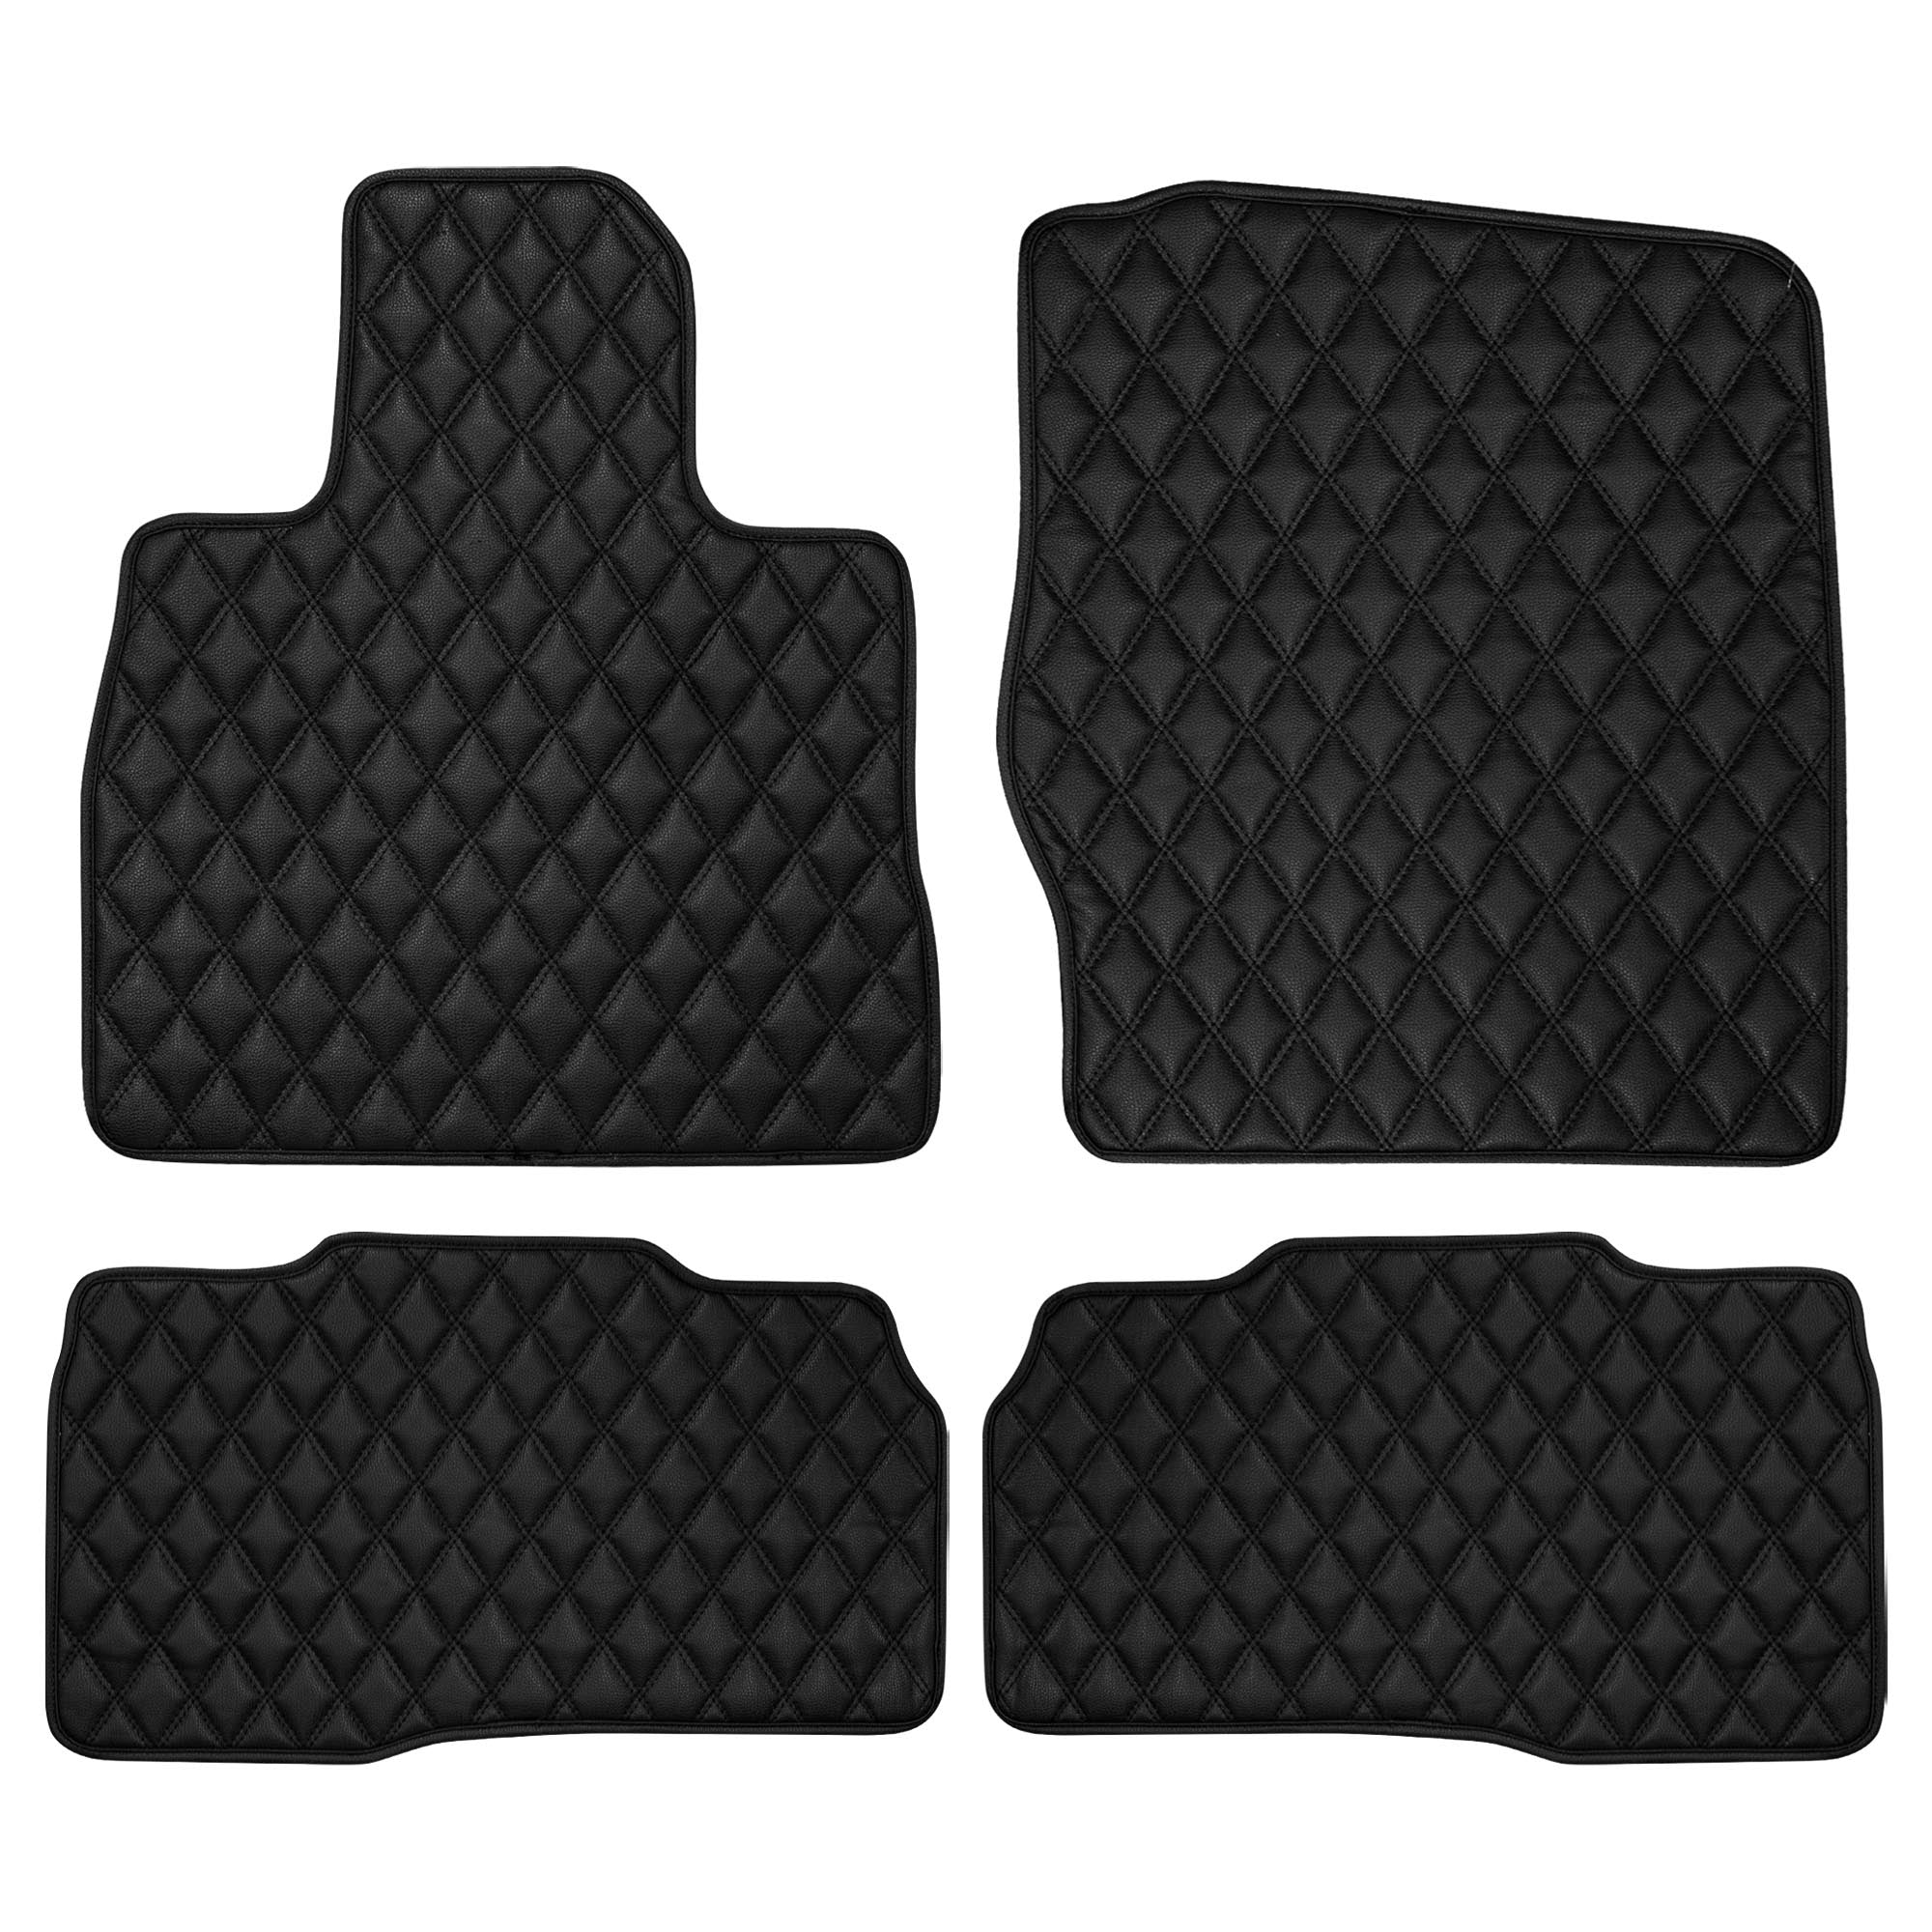 Faux Leather Custom-Fit Floor Mats for 2020-2022 Ford Explorer - Black